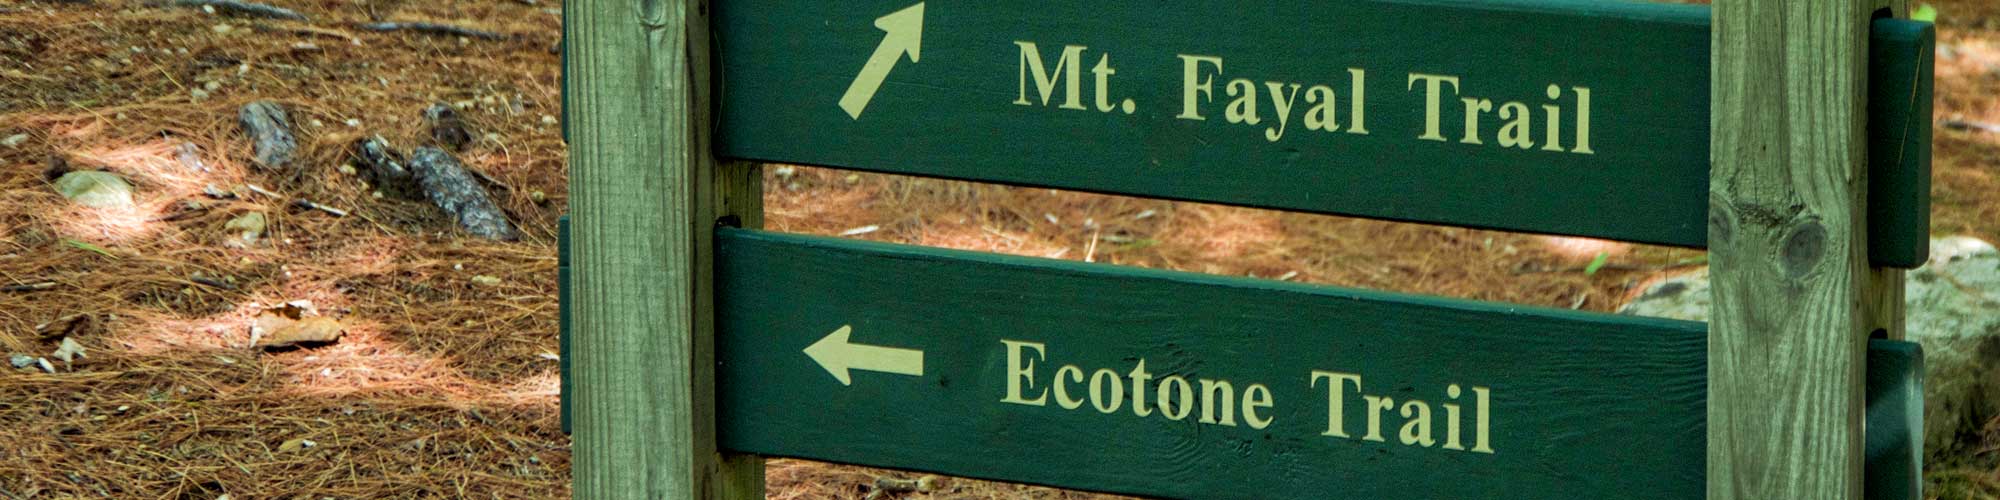 Hiking trail signs pointing to Ecotone Trail and Mount Fayal Trail